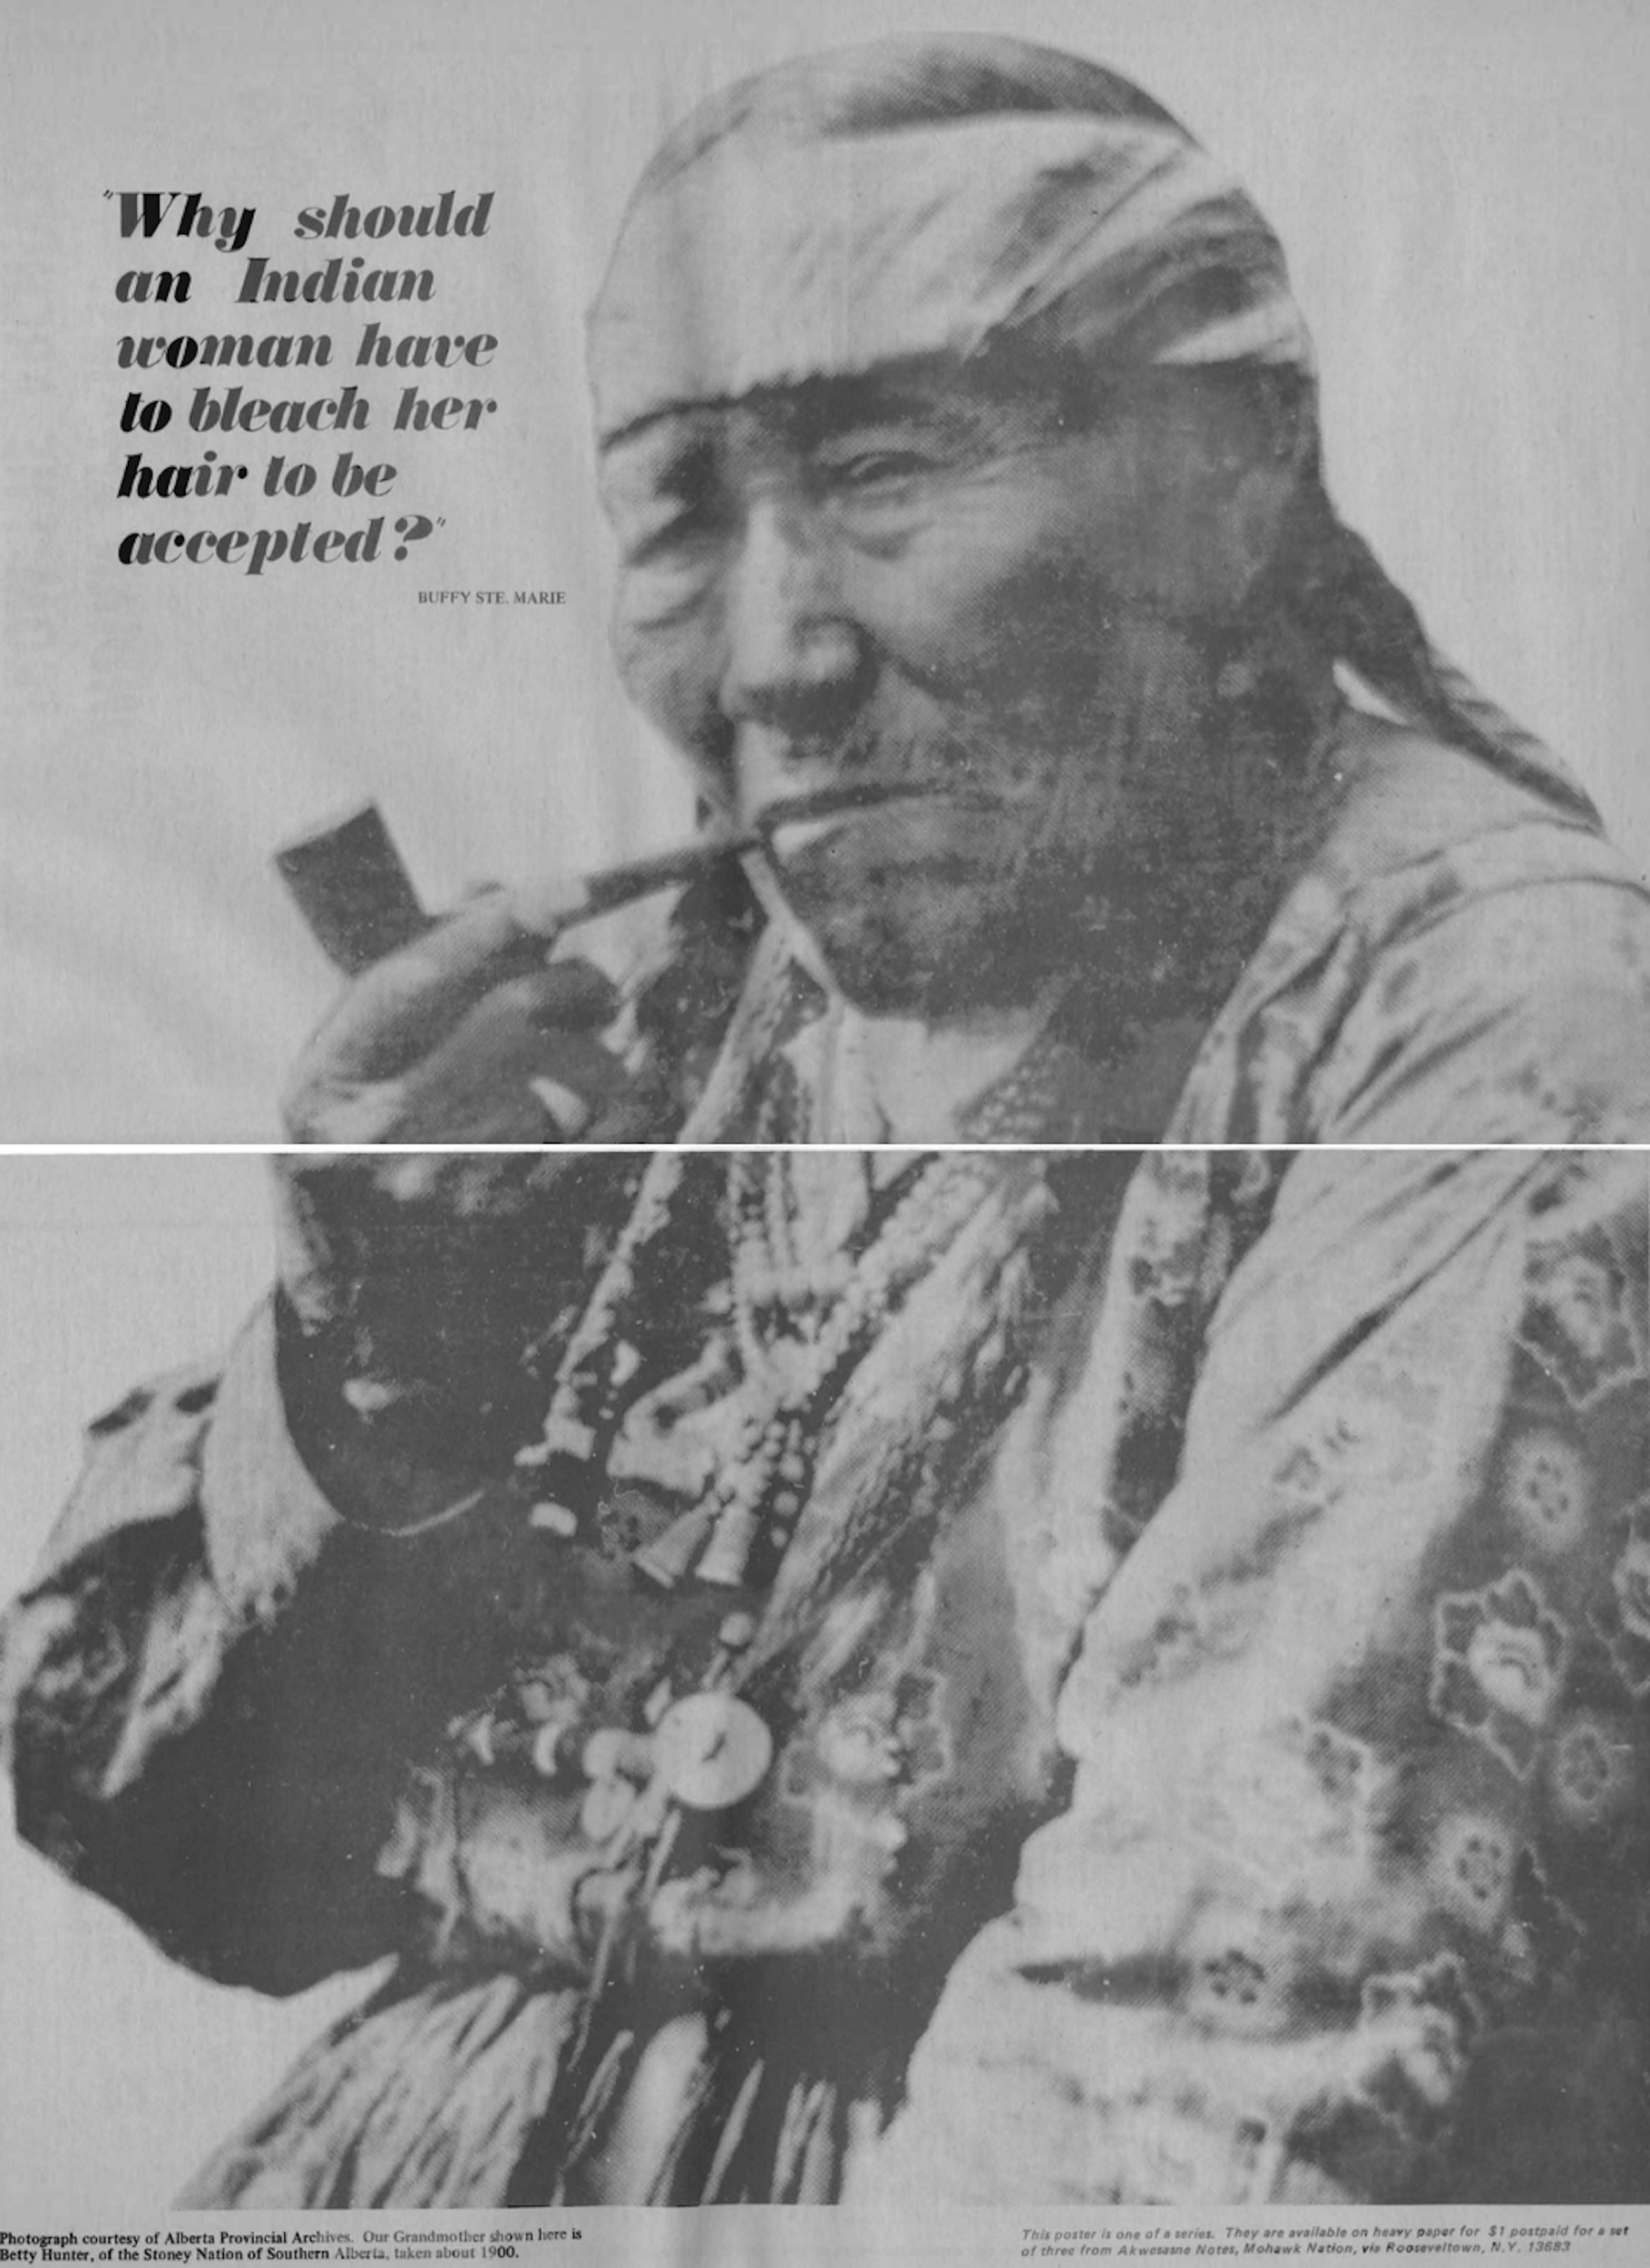 Black-and-white duotone photograph of an elderly Native American woman smoking a pipe, with the words "Why should an Indian woman have to bleach her hair to be accepted?"